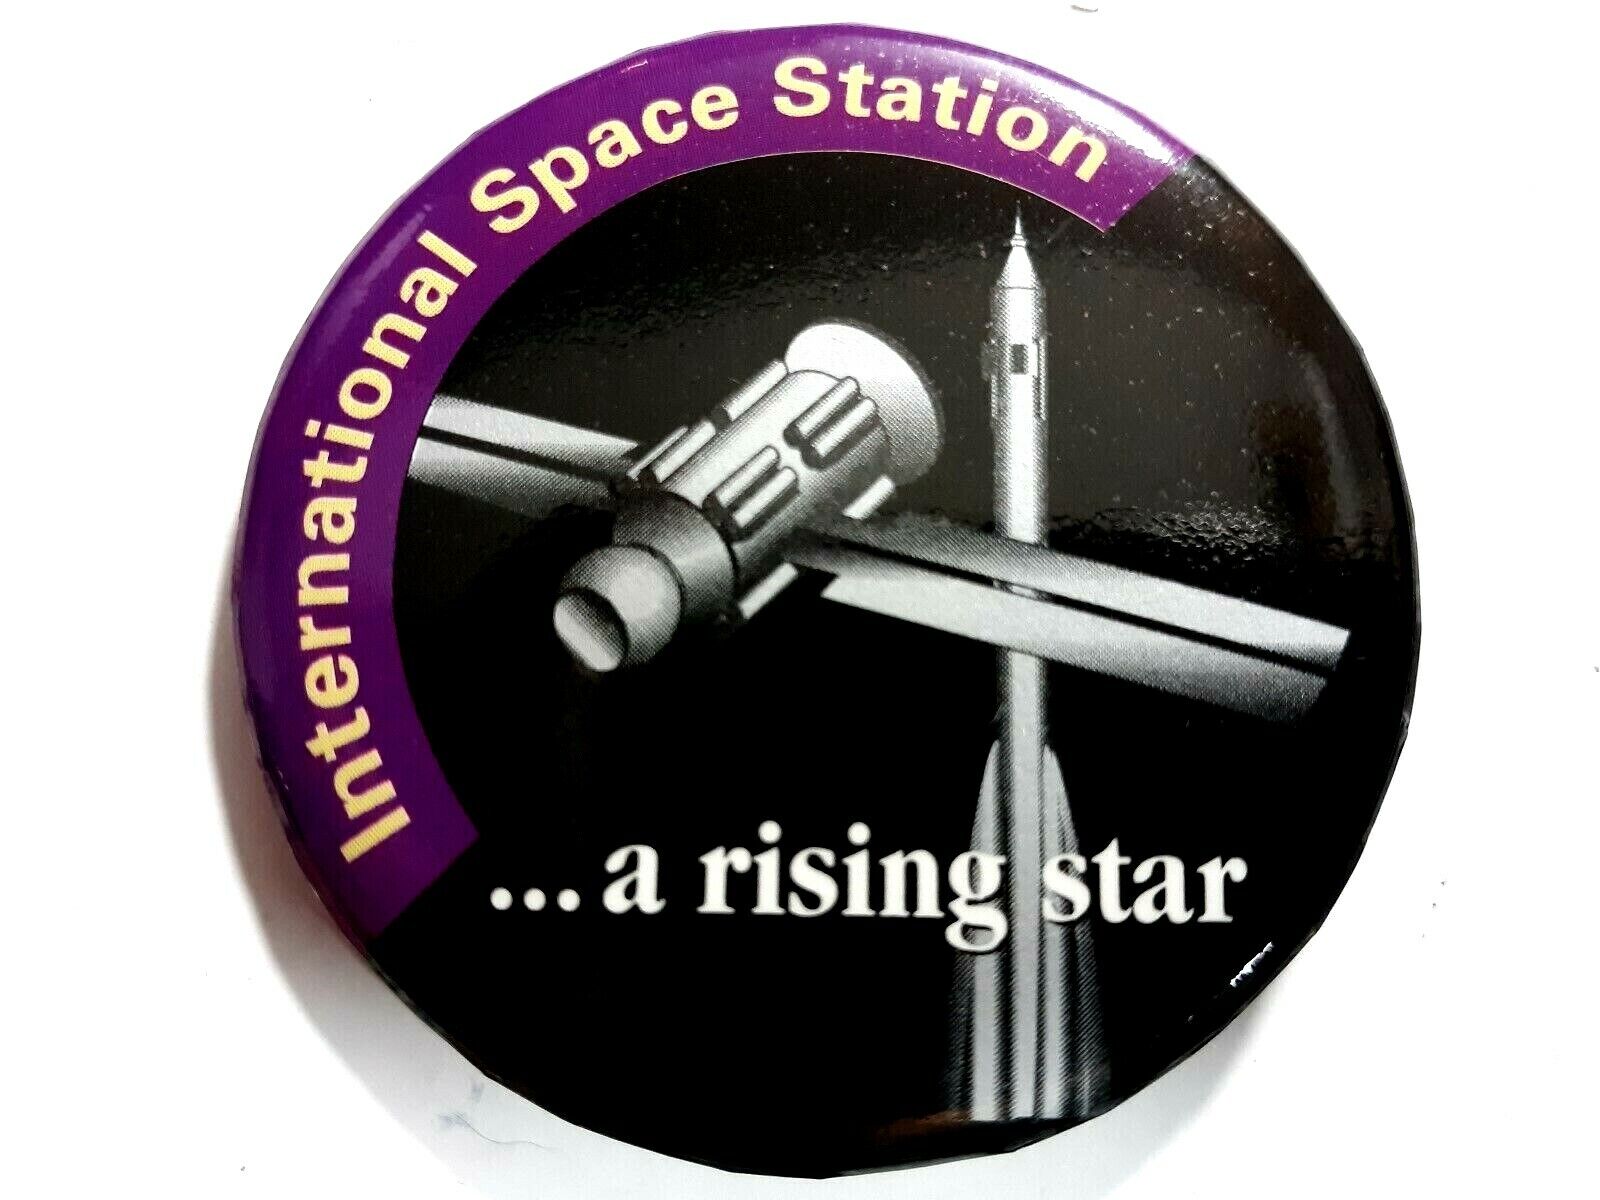 NASA International Space Station pin button pre-owned